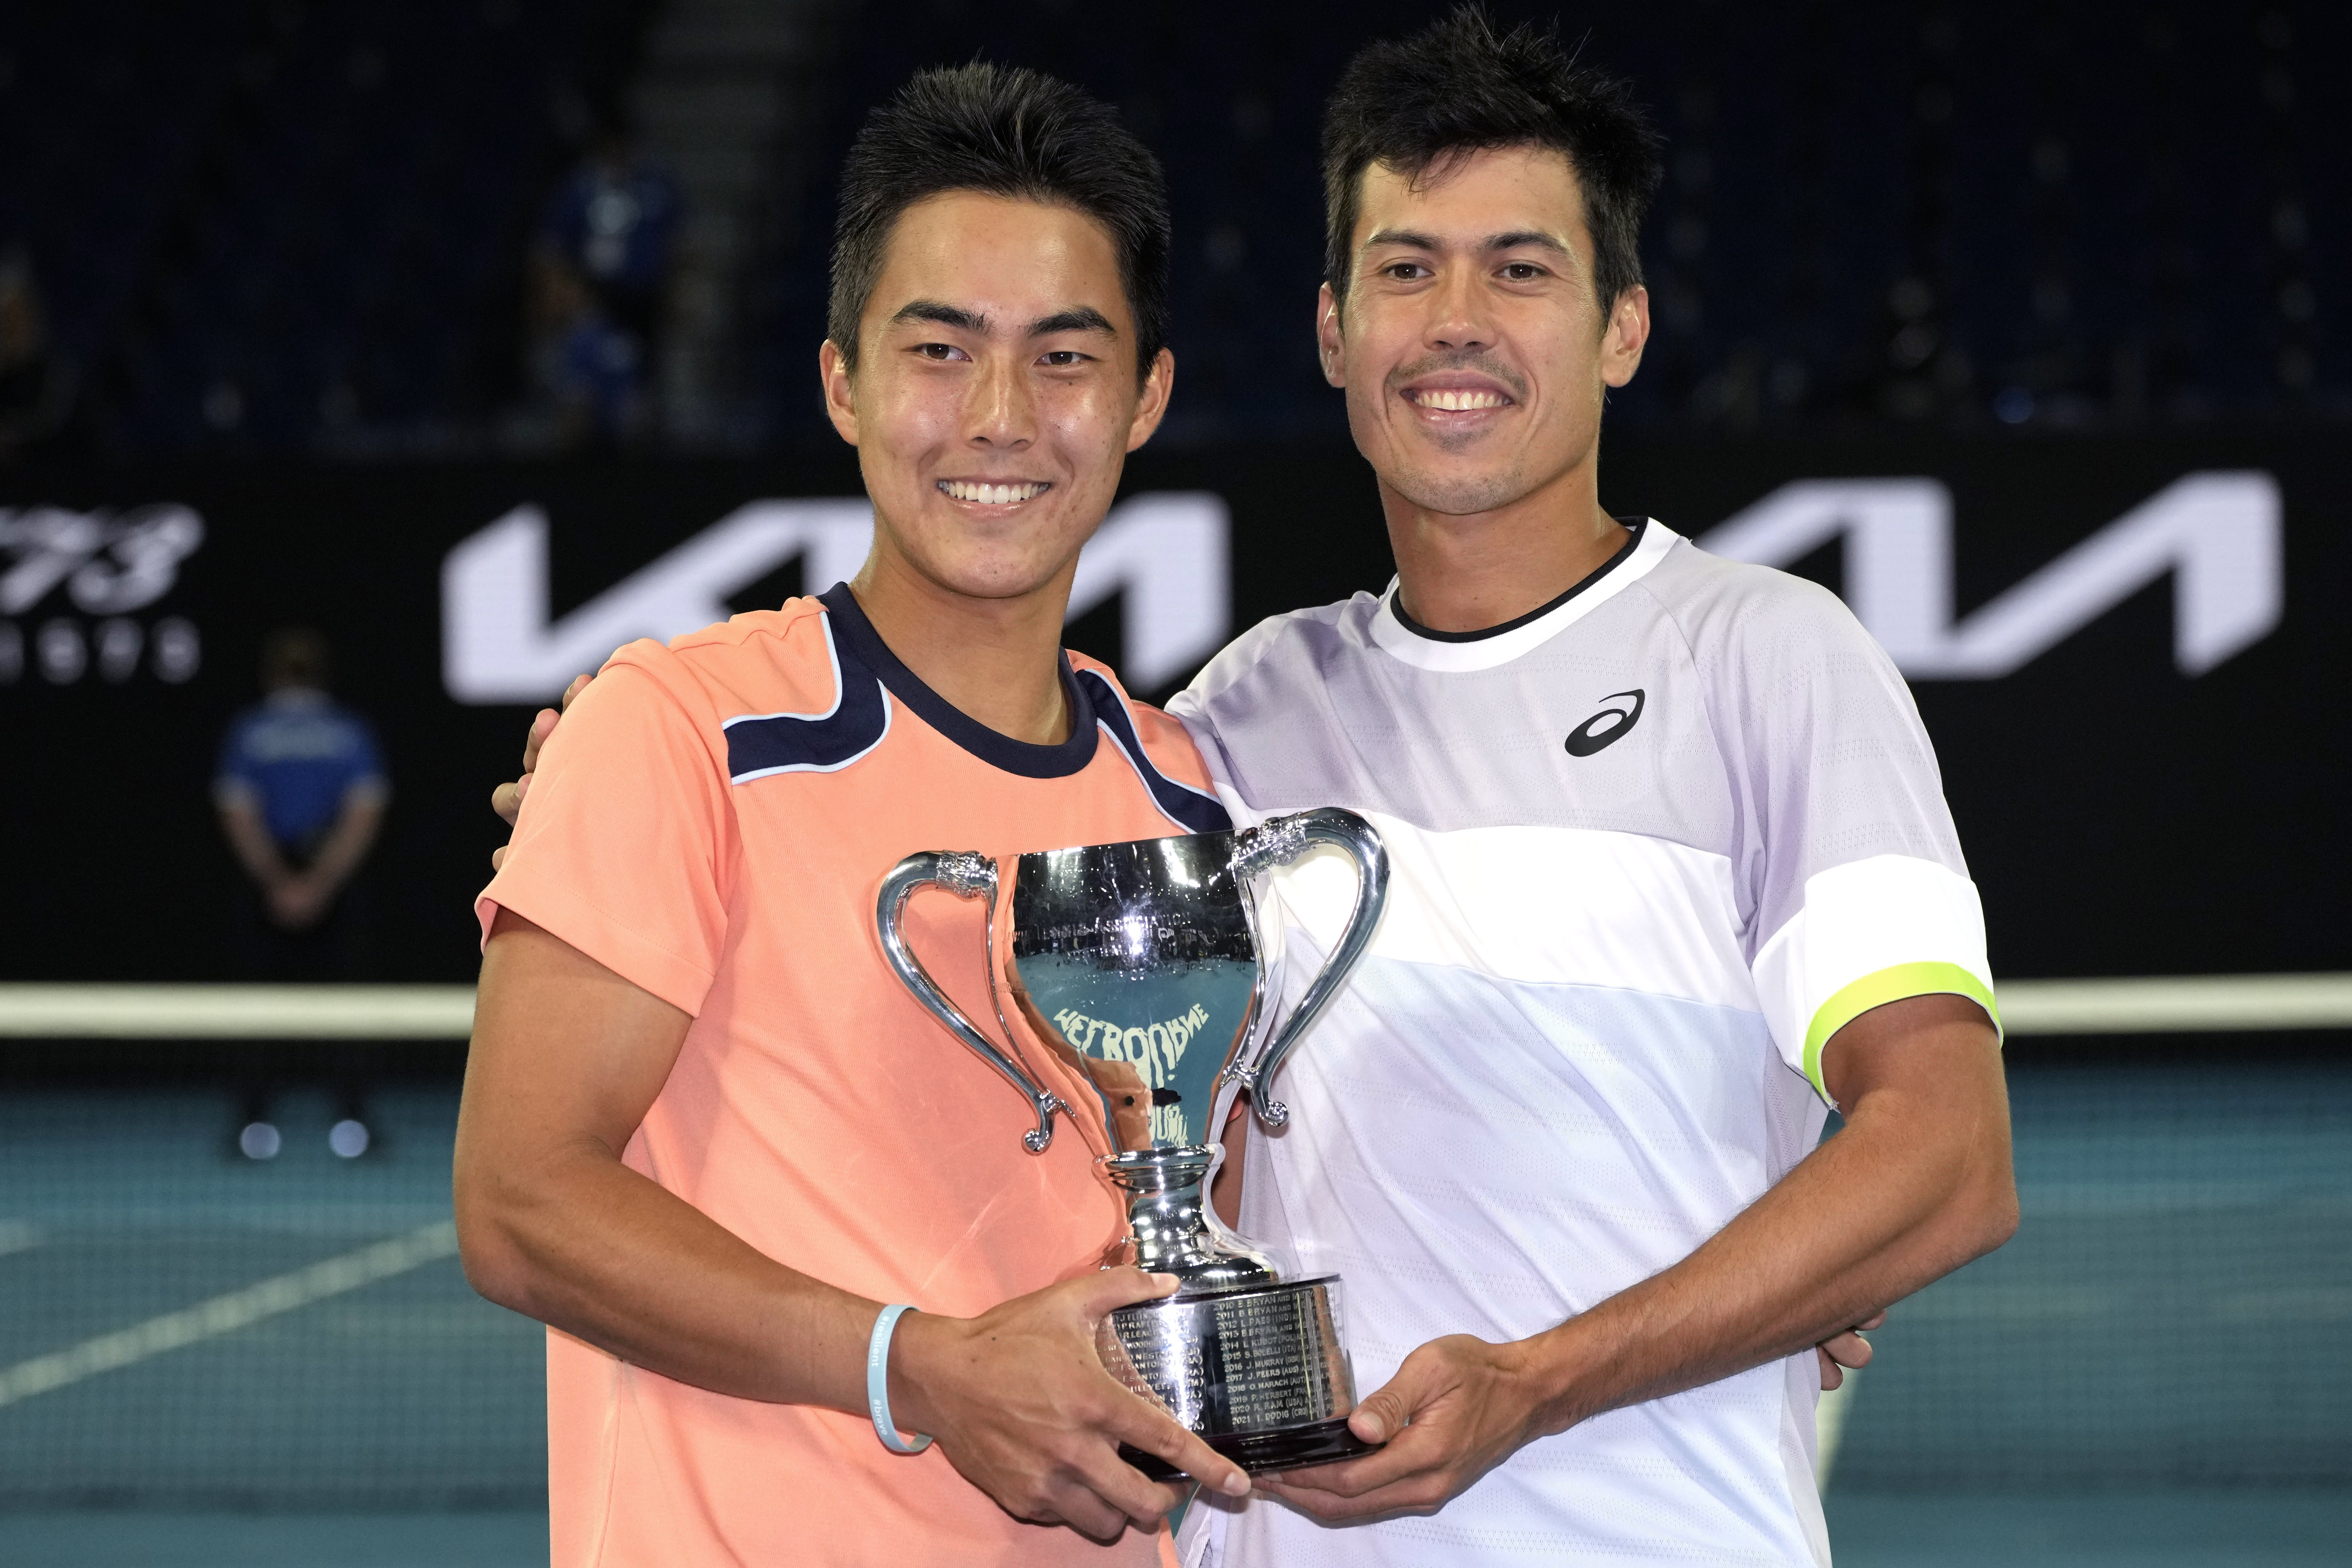 A debut to remember Wild cards Rinky Hijikata and Jason Kubler win Australian Open mens doubles crown